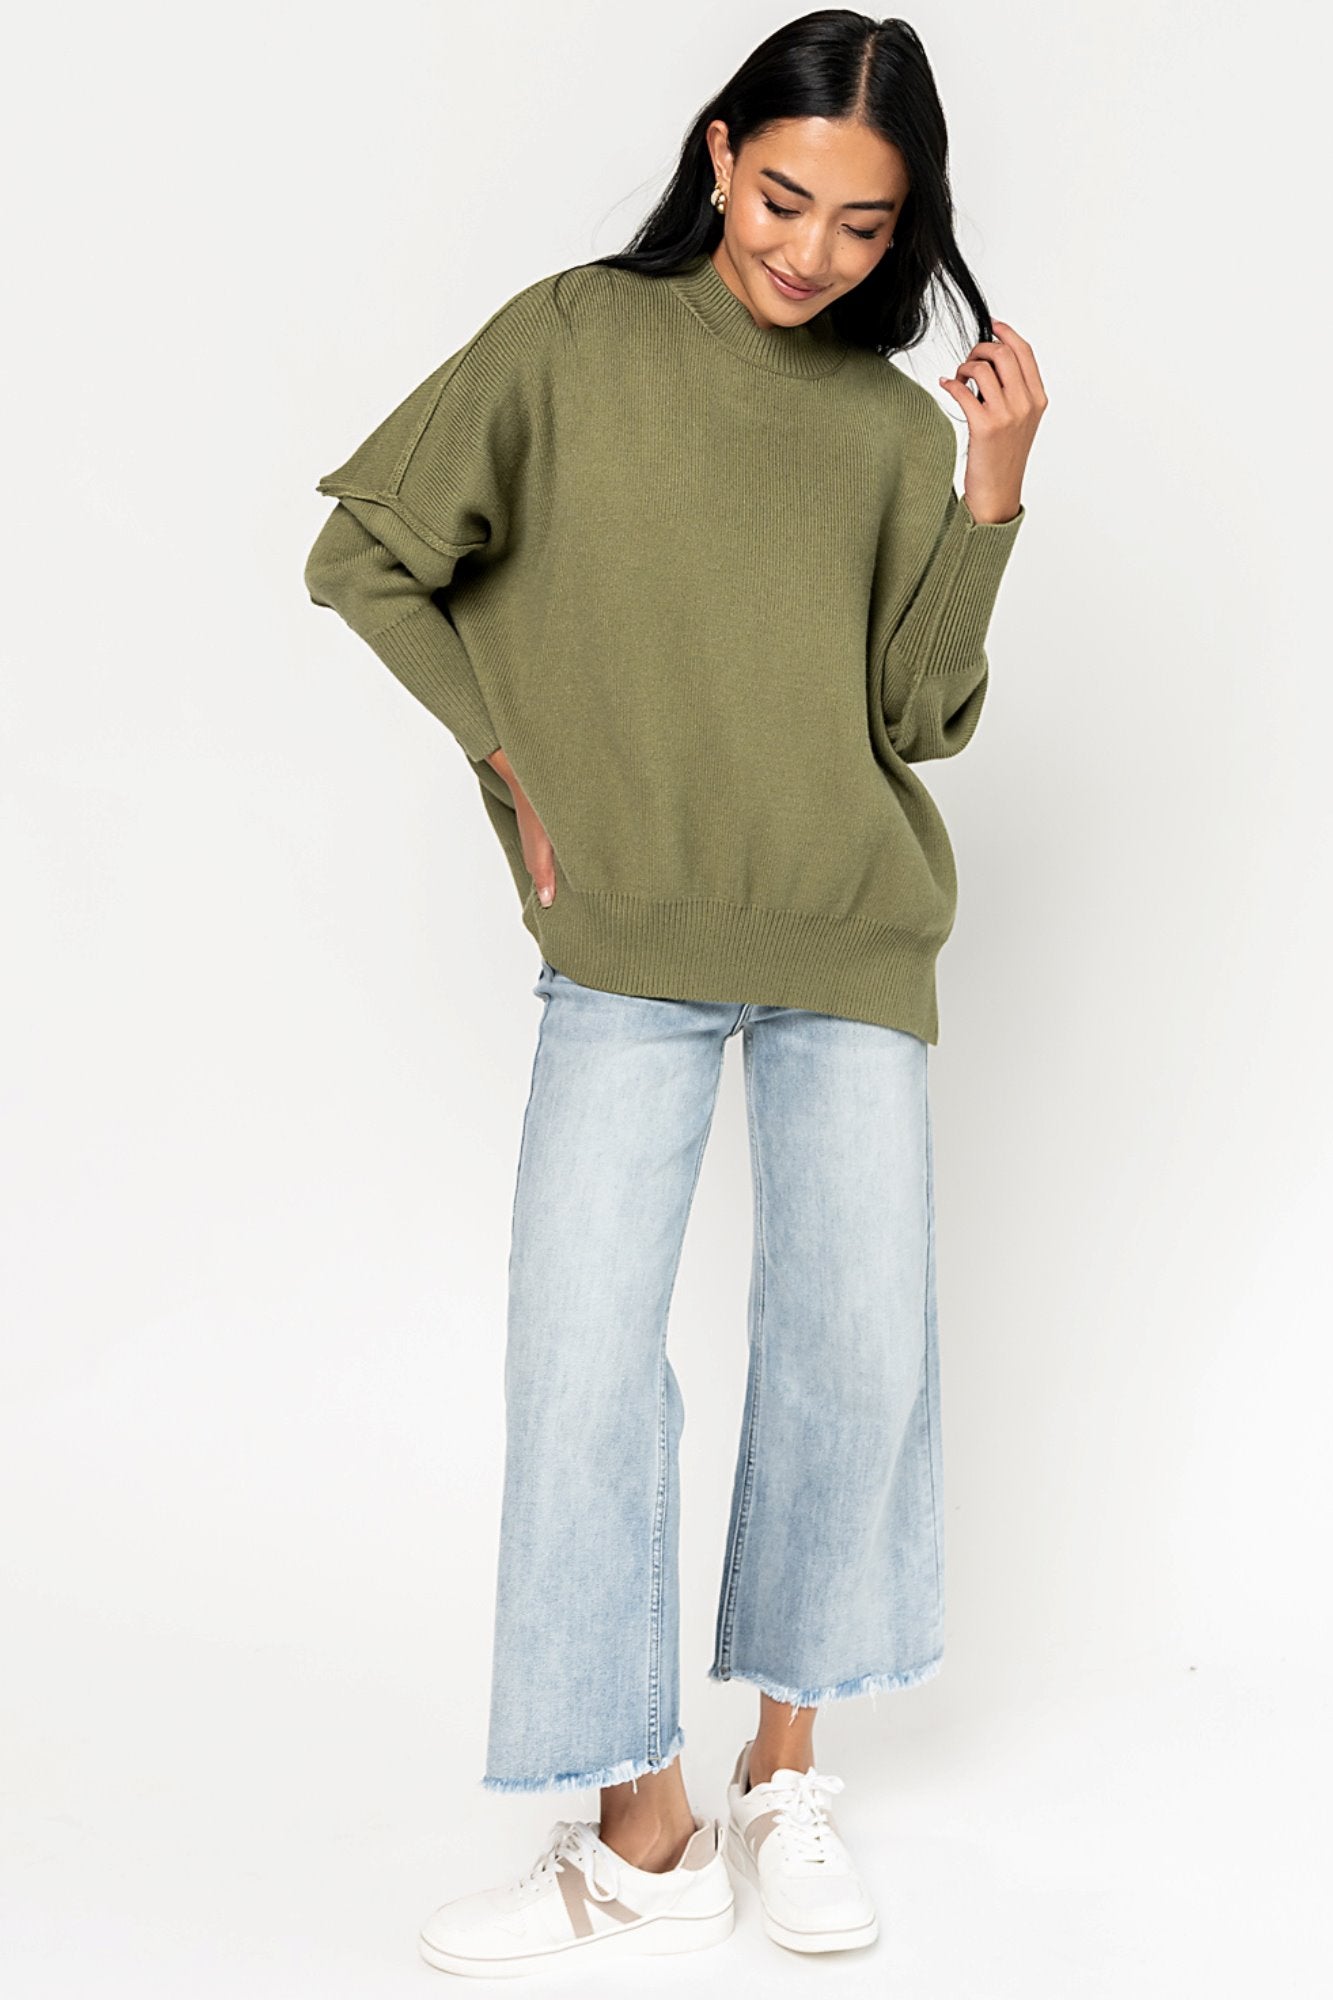 McKell Sweater in Olive Holley Girl 